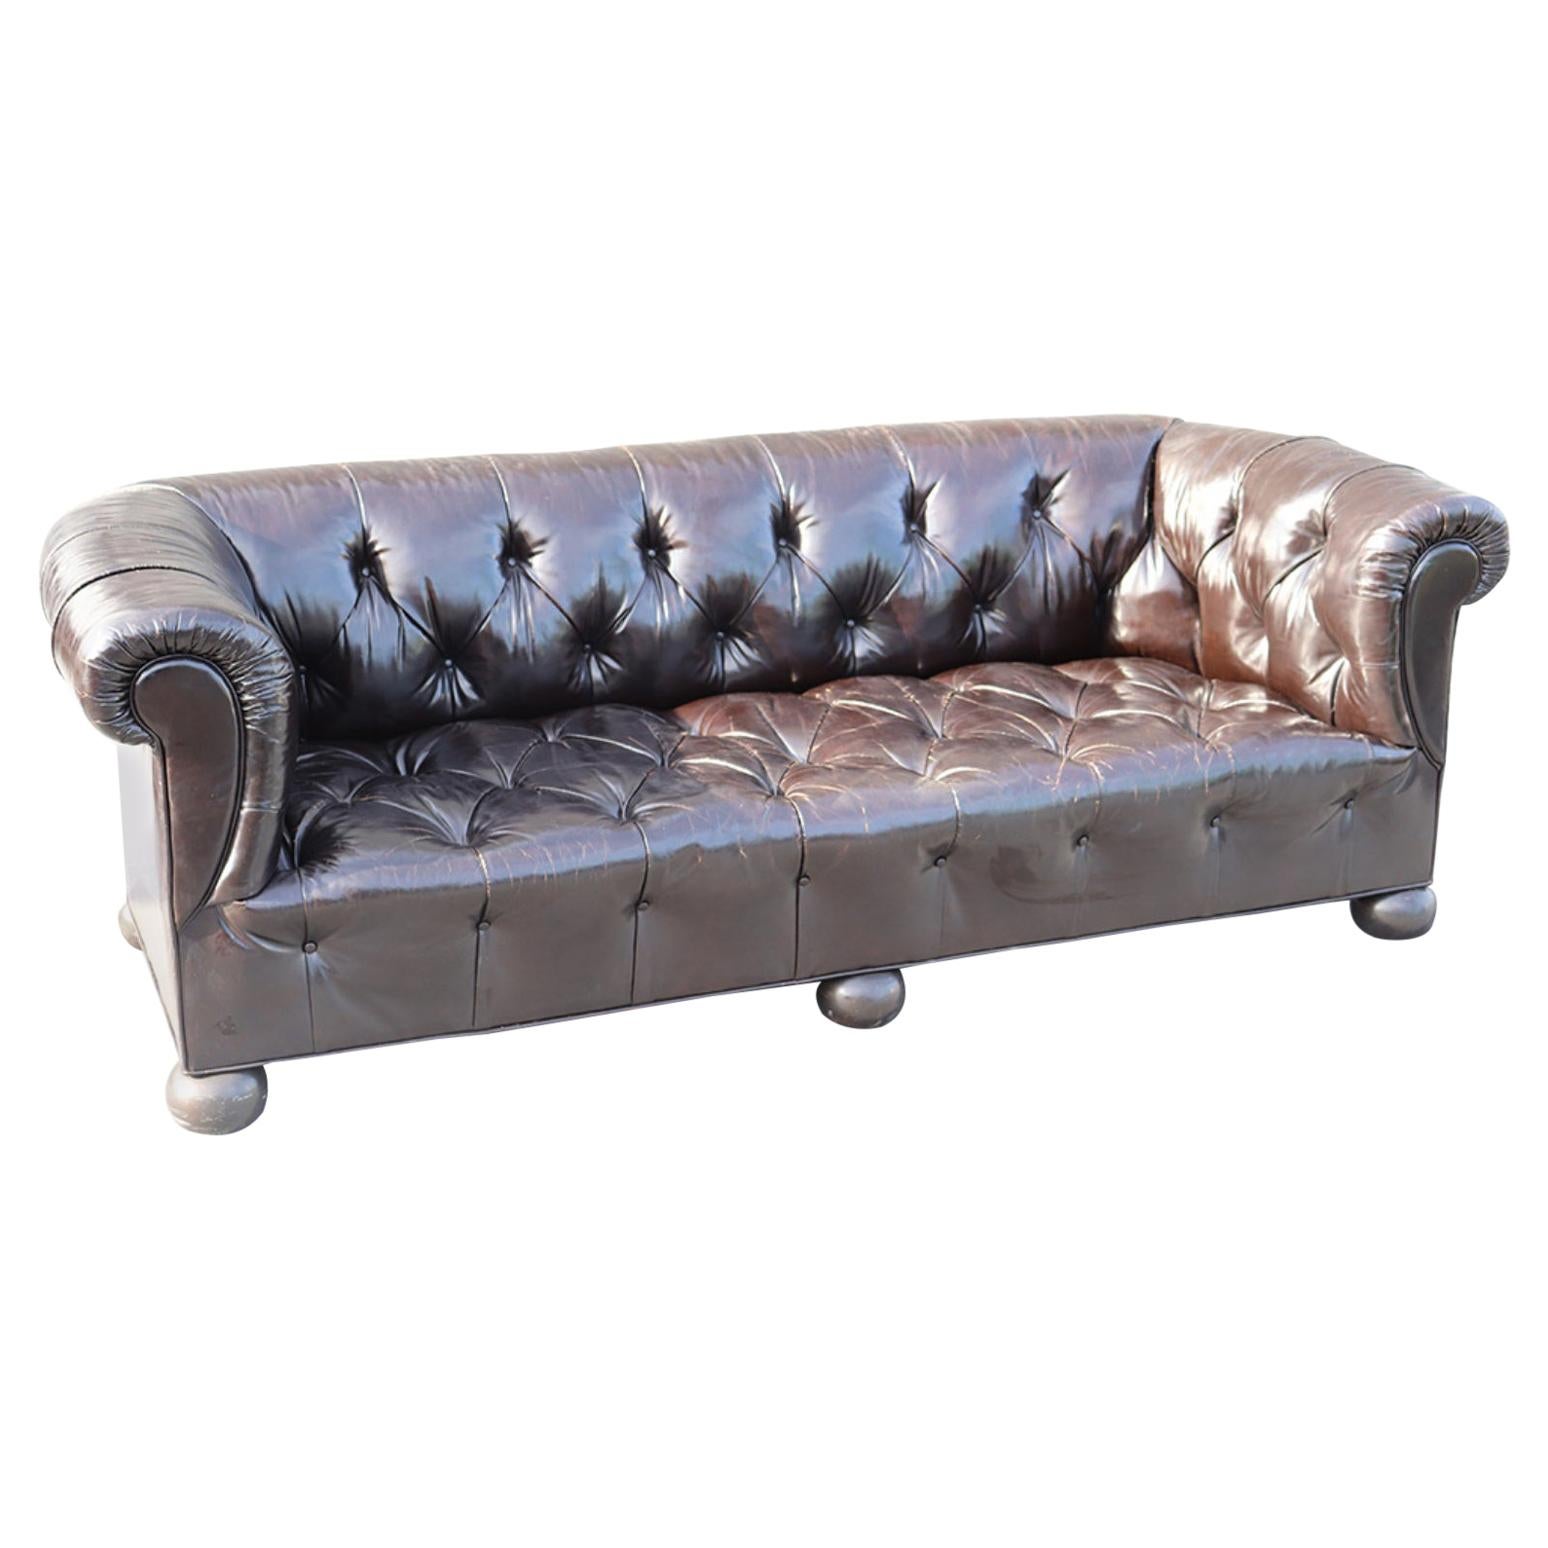 English Made Brown Leather Chesterfield Sofa